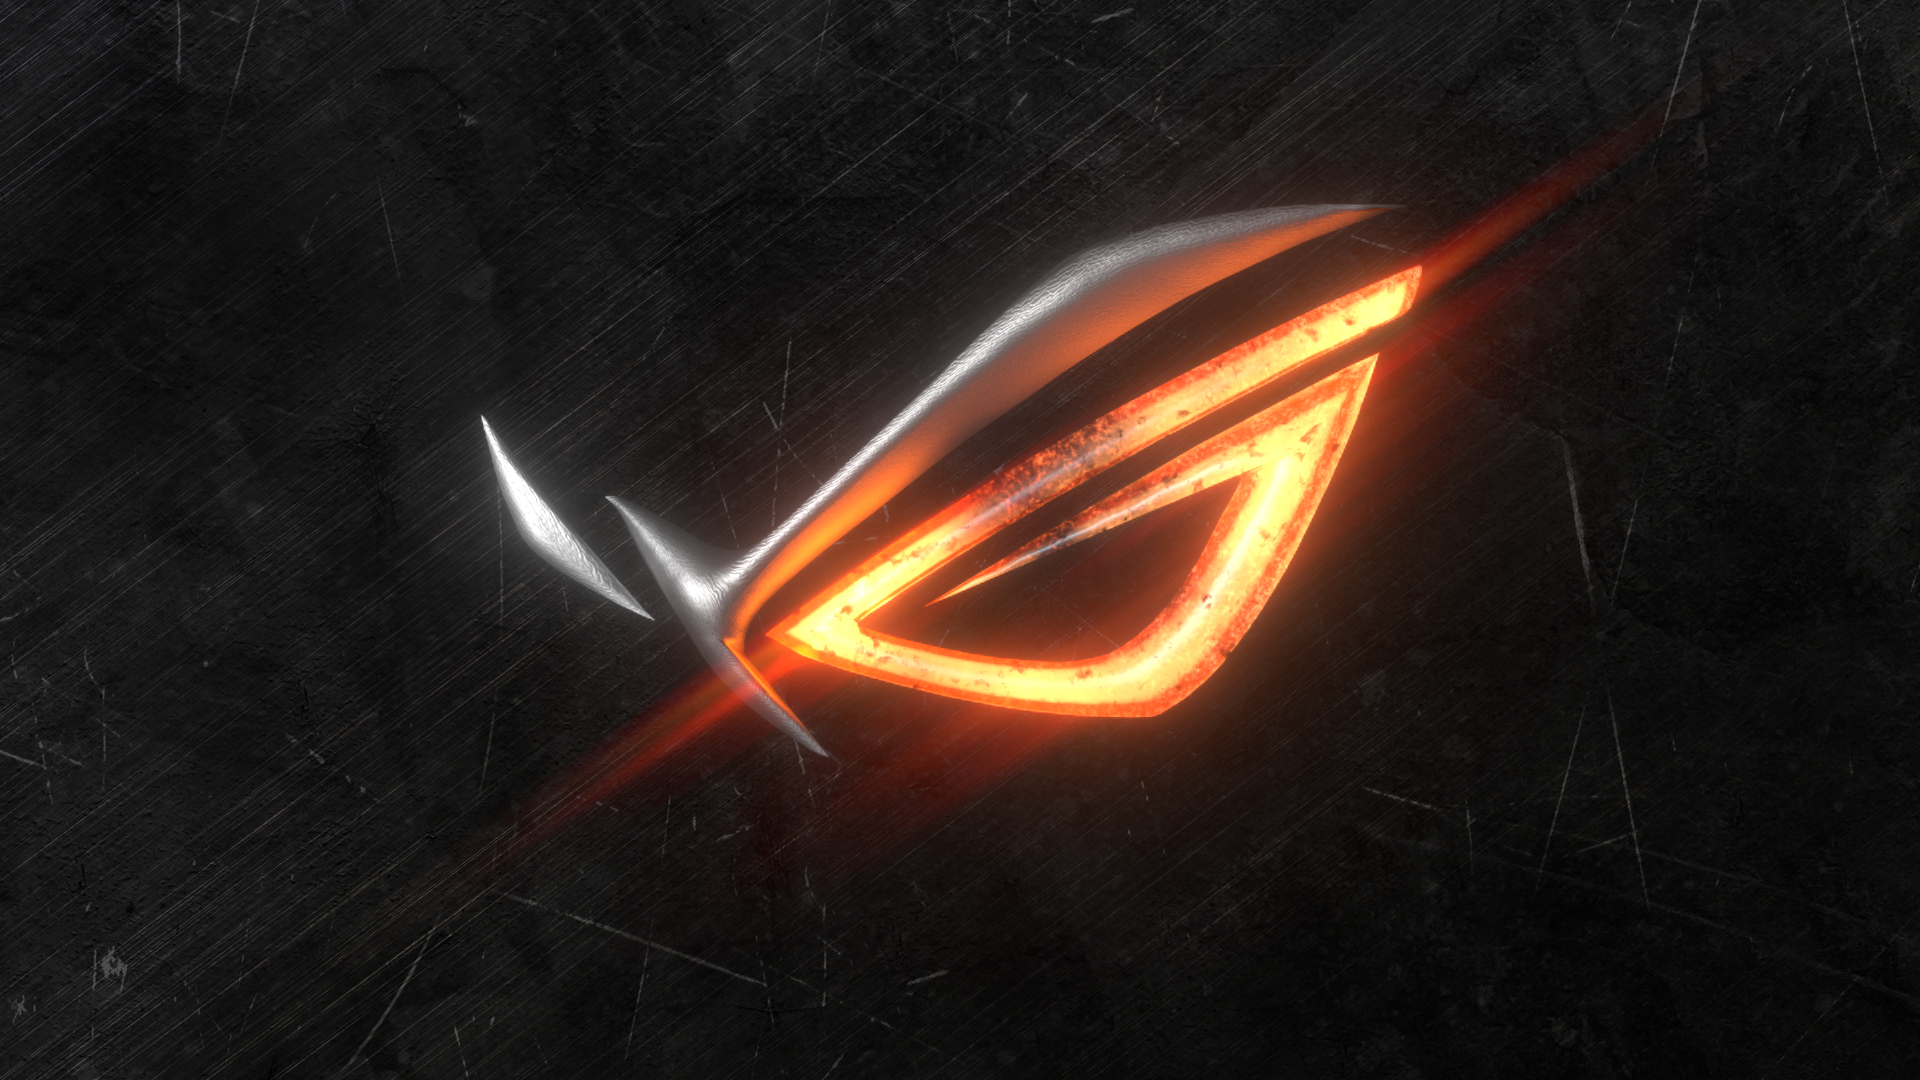 1920x1080 Asus Rog Wallpapers 1080p For Free Wallpaper | Android wallpaper vintage, Pc desktop wallpaper, Wallpaper pc